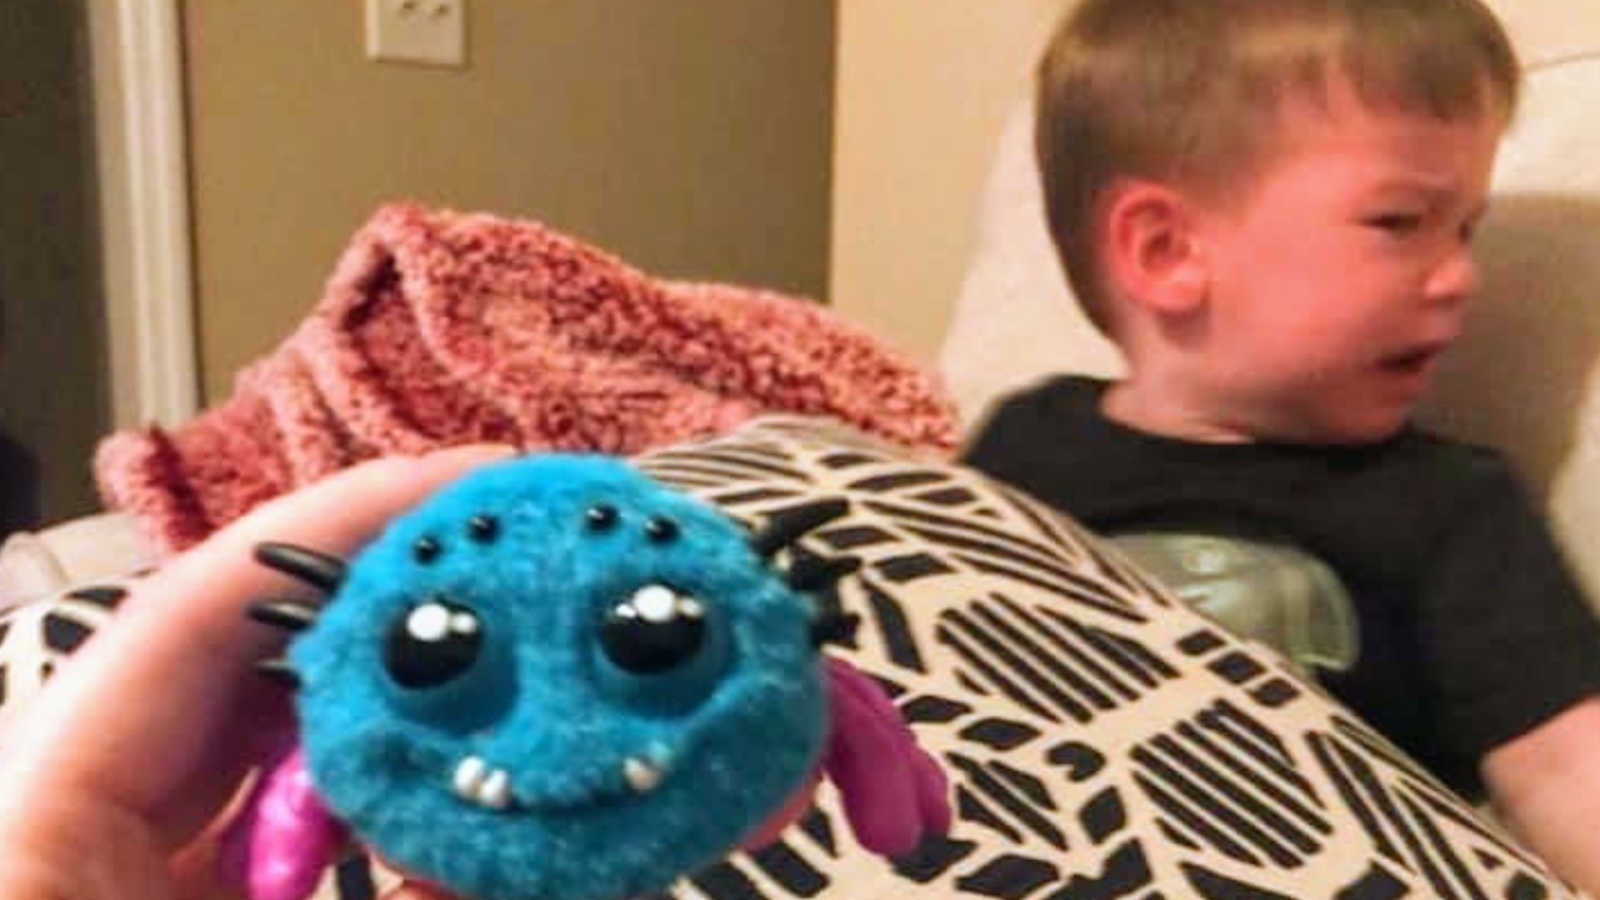 Adult hand holds fake fuzzy spider while young boy in background sits on couch crying